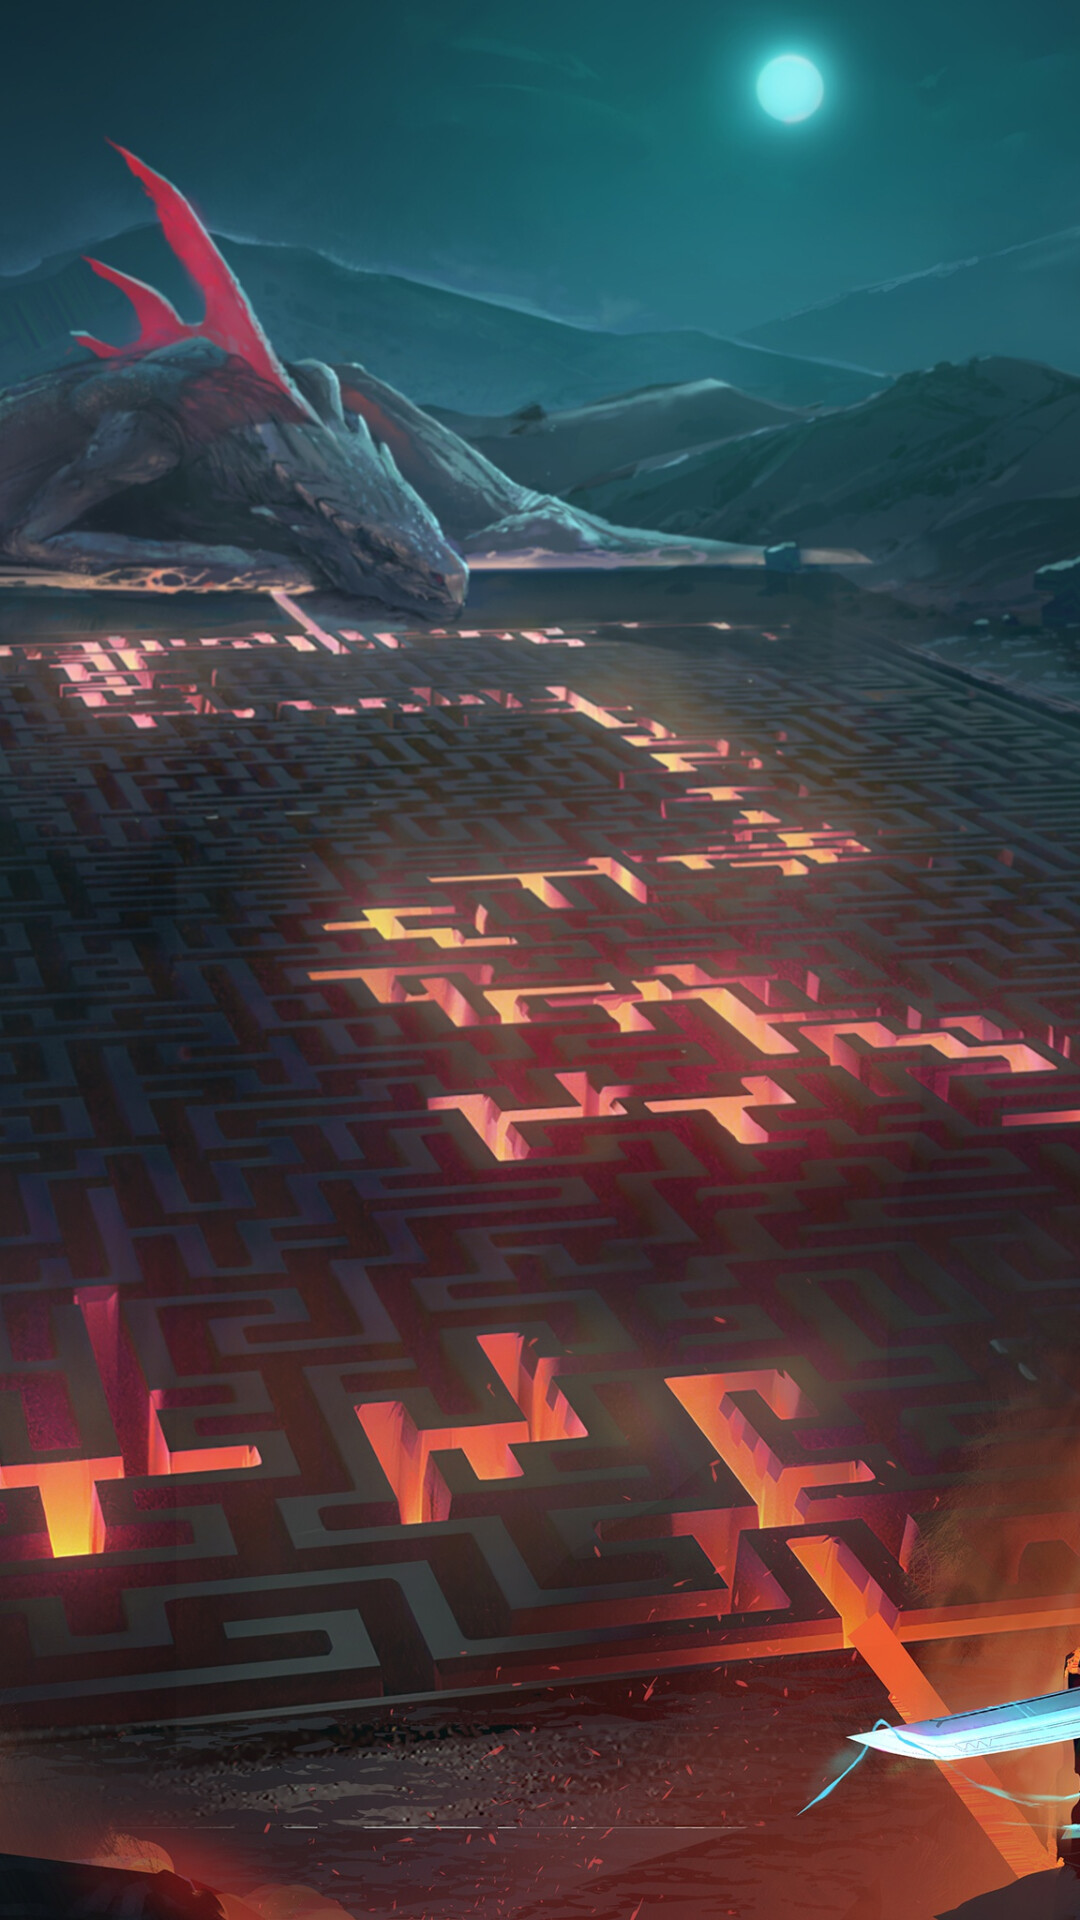 Labyrinth: A complicated system of paths or passages, Maze, Digital art. 1080x1920 Full HD Wallpaper.